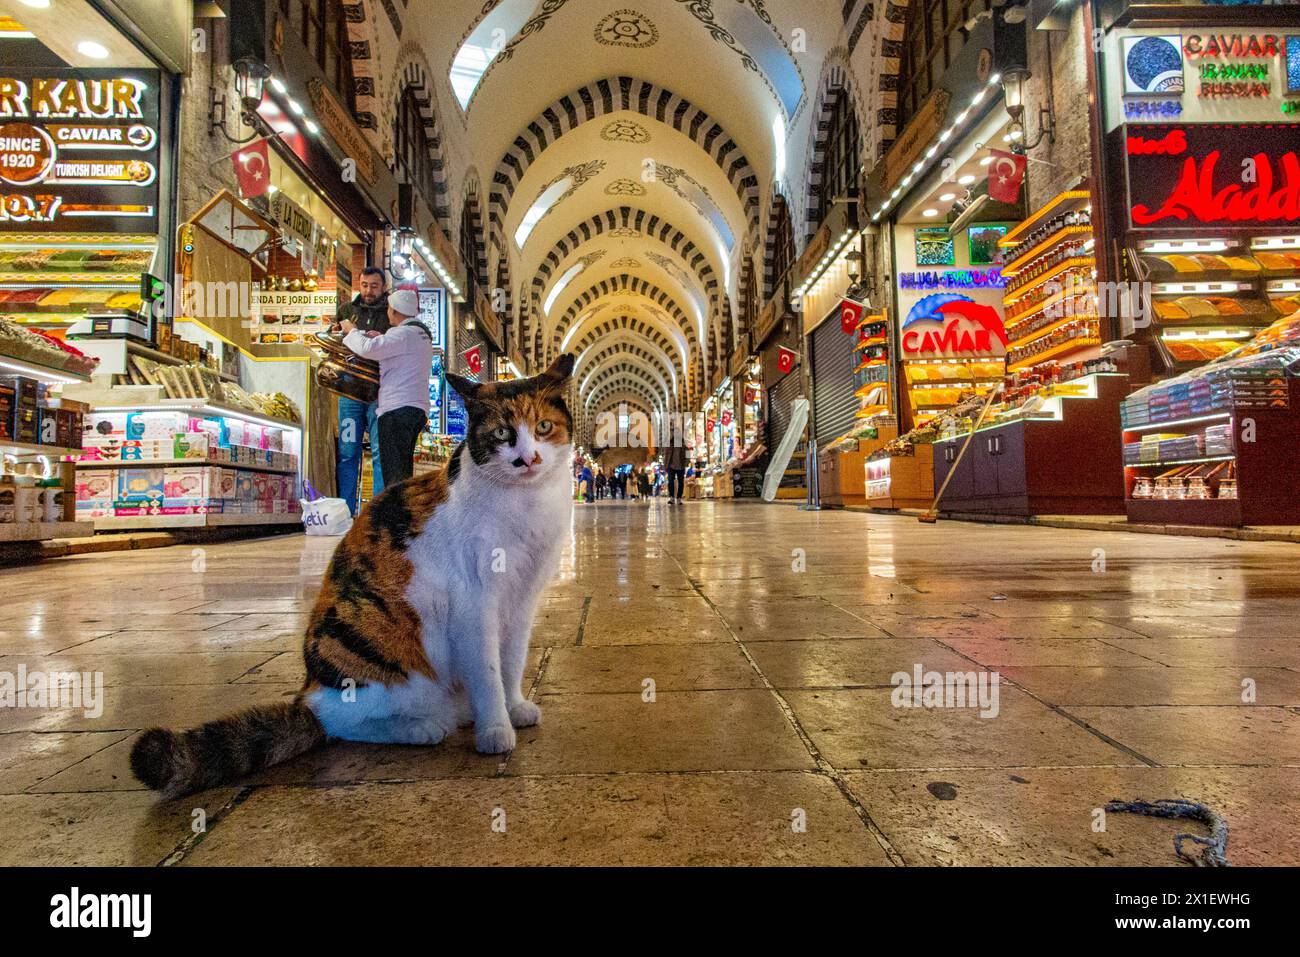 A cat in the foreground of the Egyptian covered market, famous for spices in Istanbul, Turkey Stock Photo